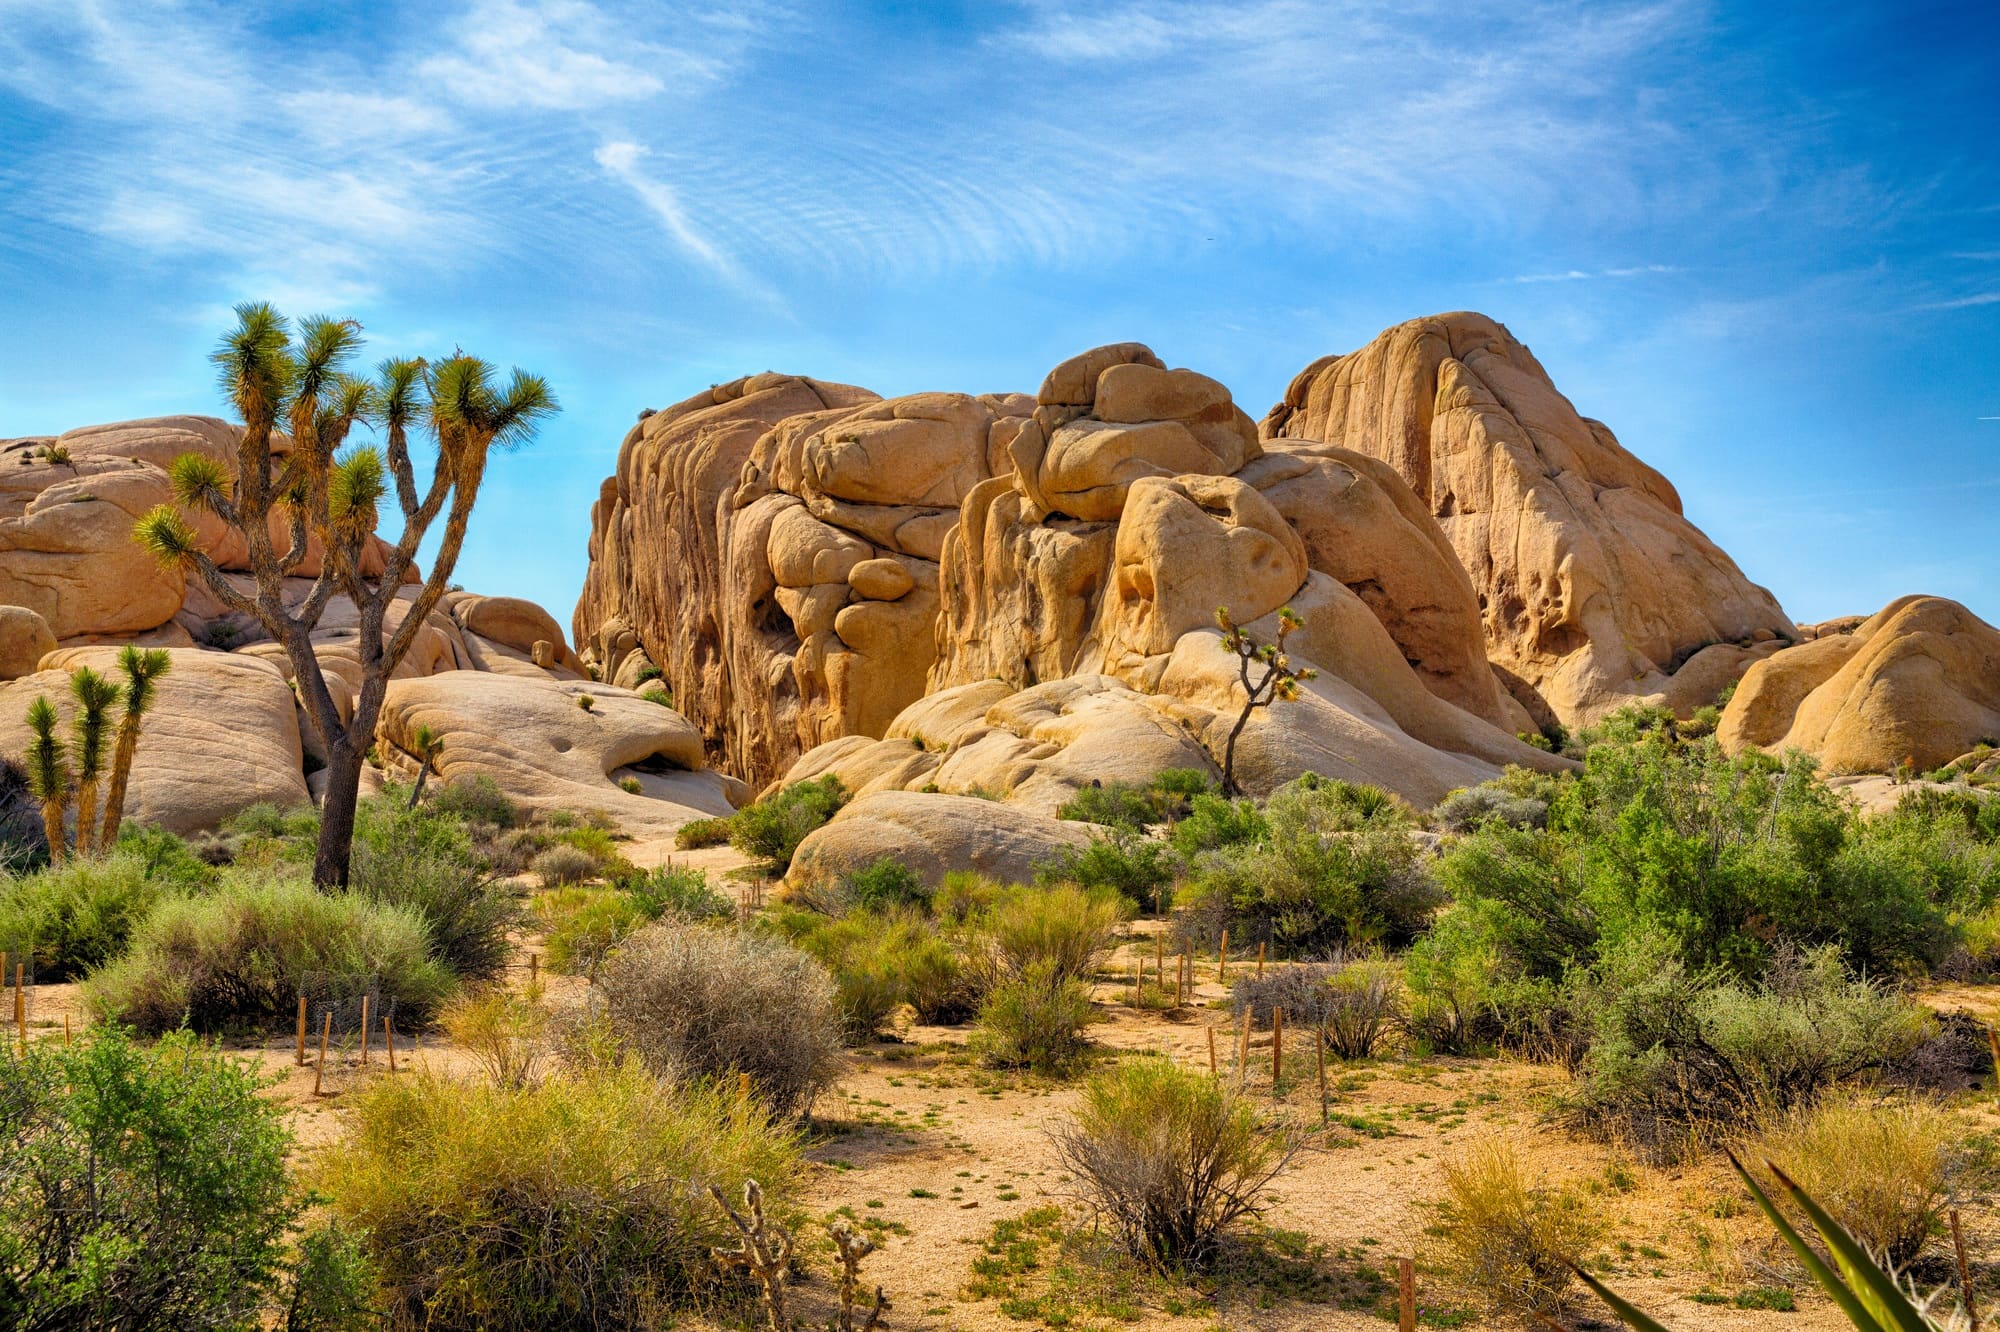 Joshua Tree National Park // Check out the best National Parks to visit in winter so you can get outside year-round and avoid the high-season crowds.